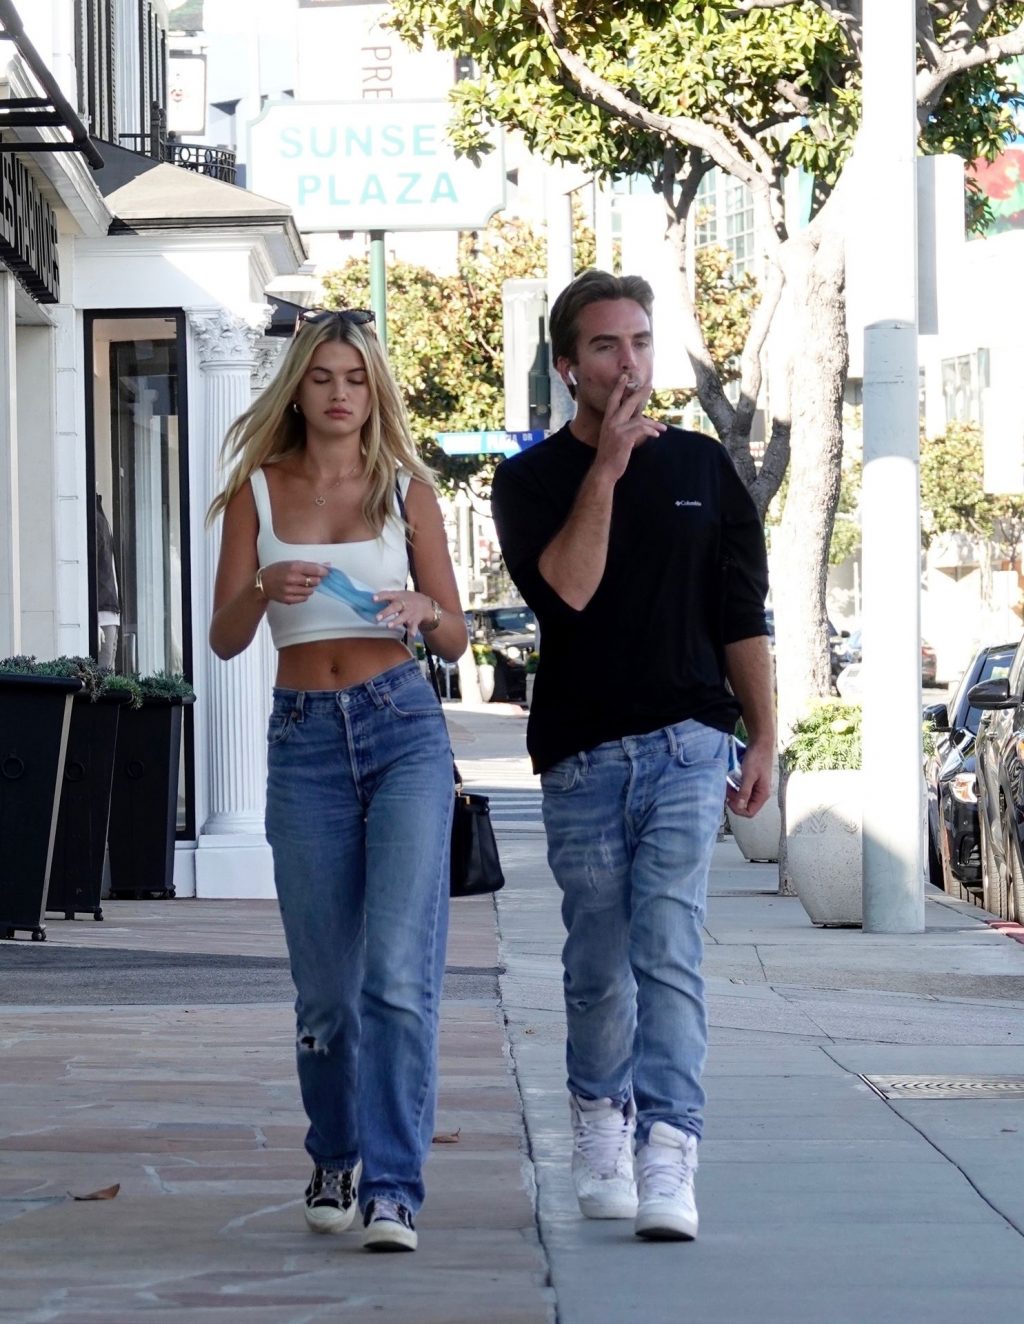 Megan Irwin Steps Out with a Male Friend in LA (20 Photos)